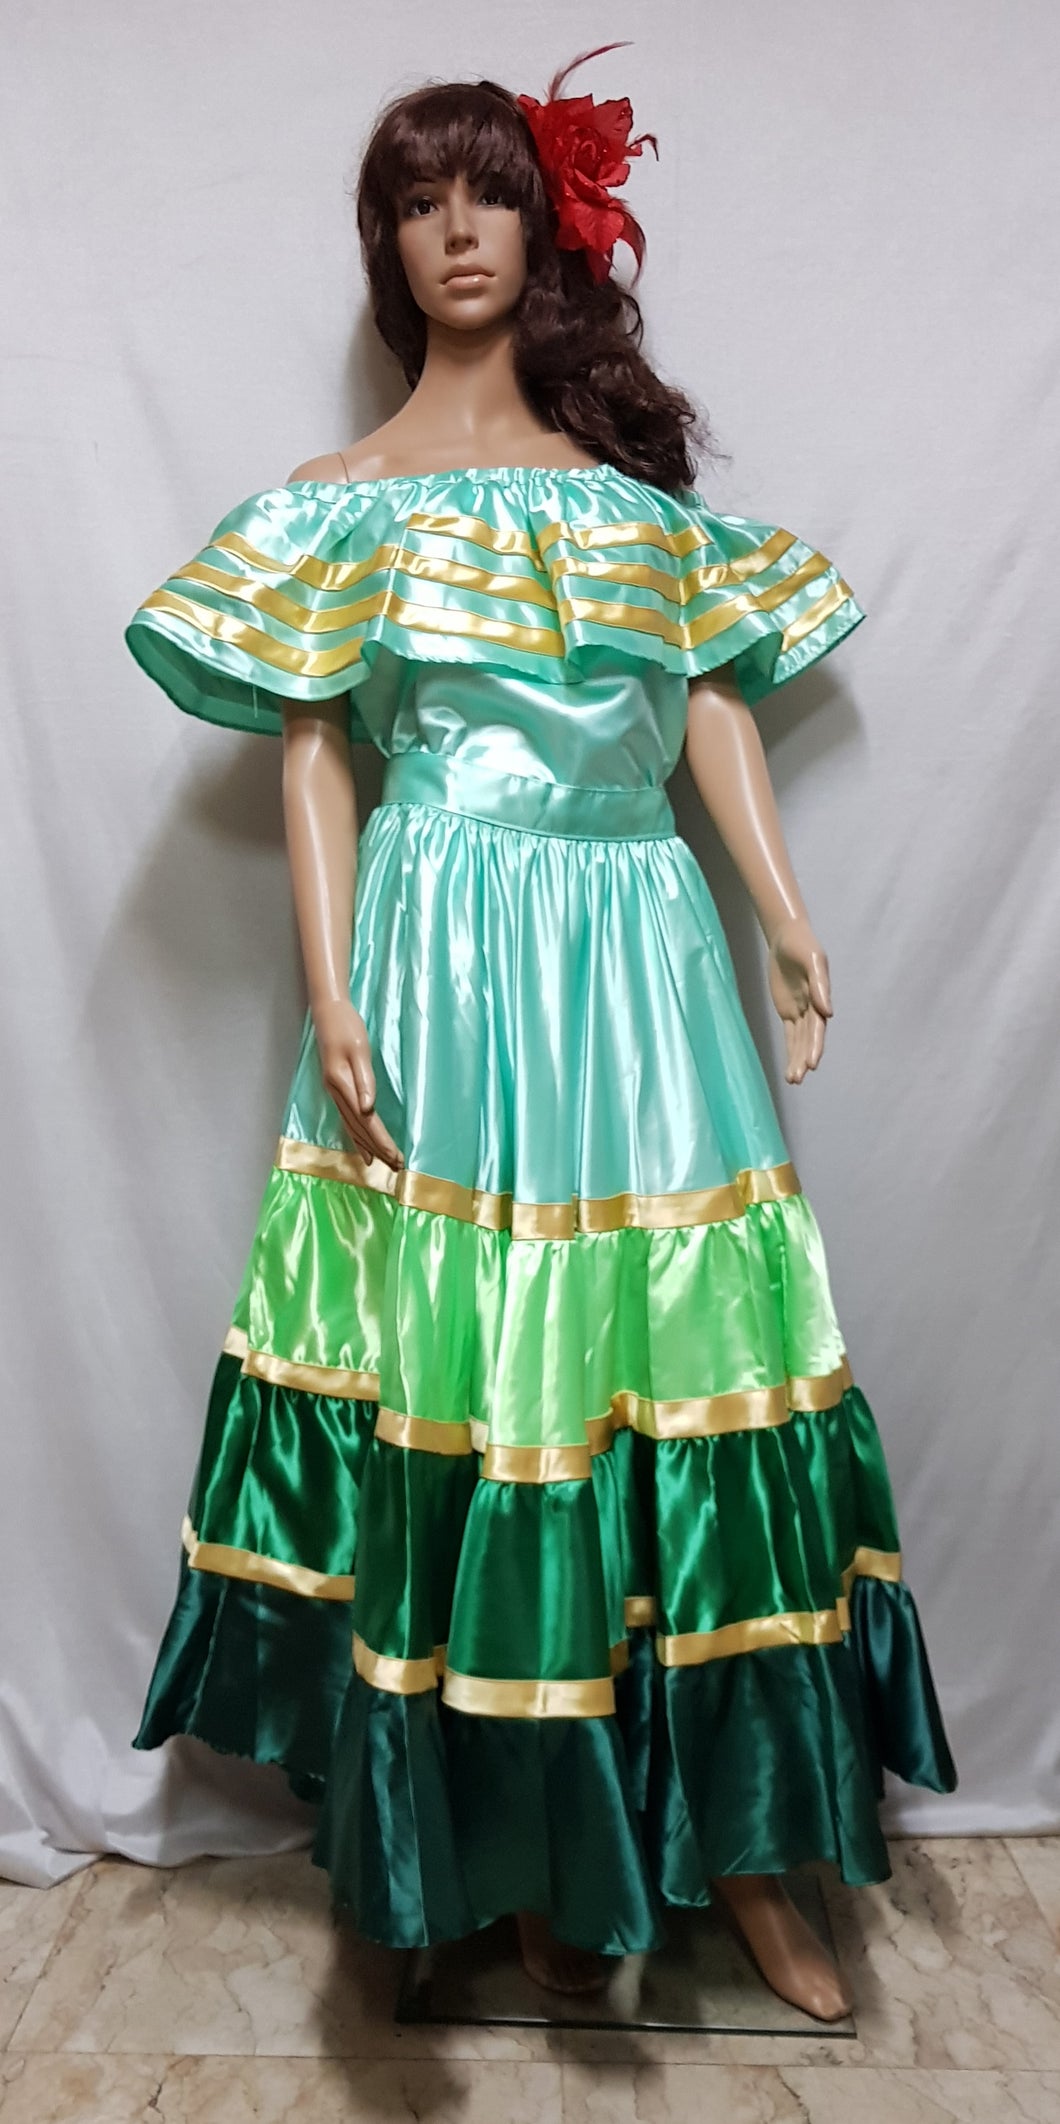 Colombia, Mexico, South America Costume Green